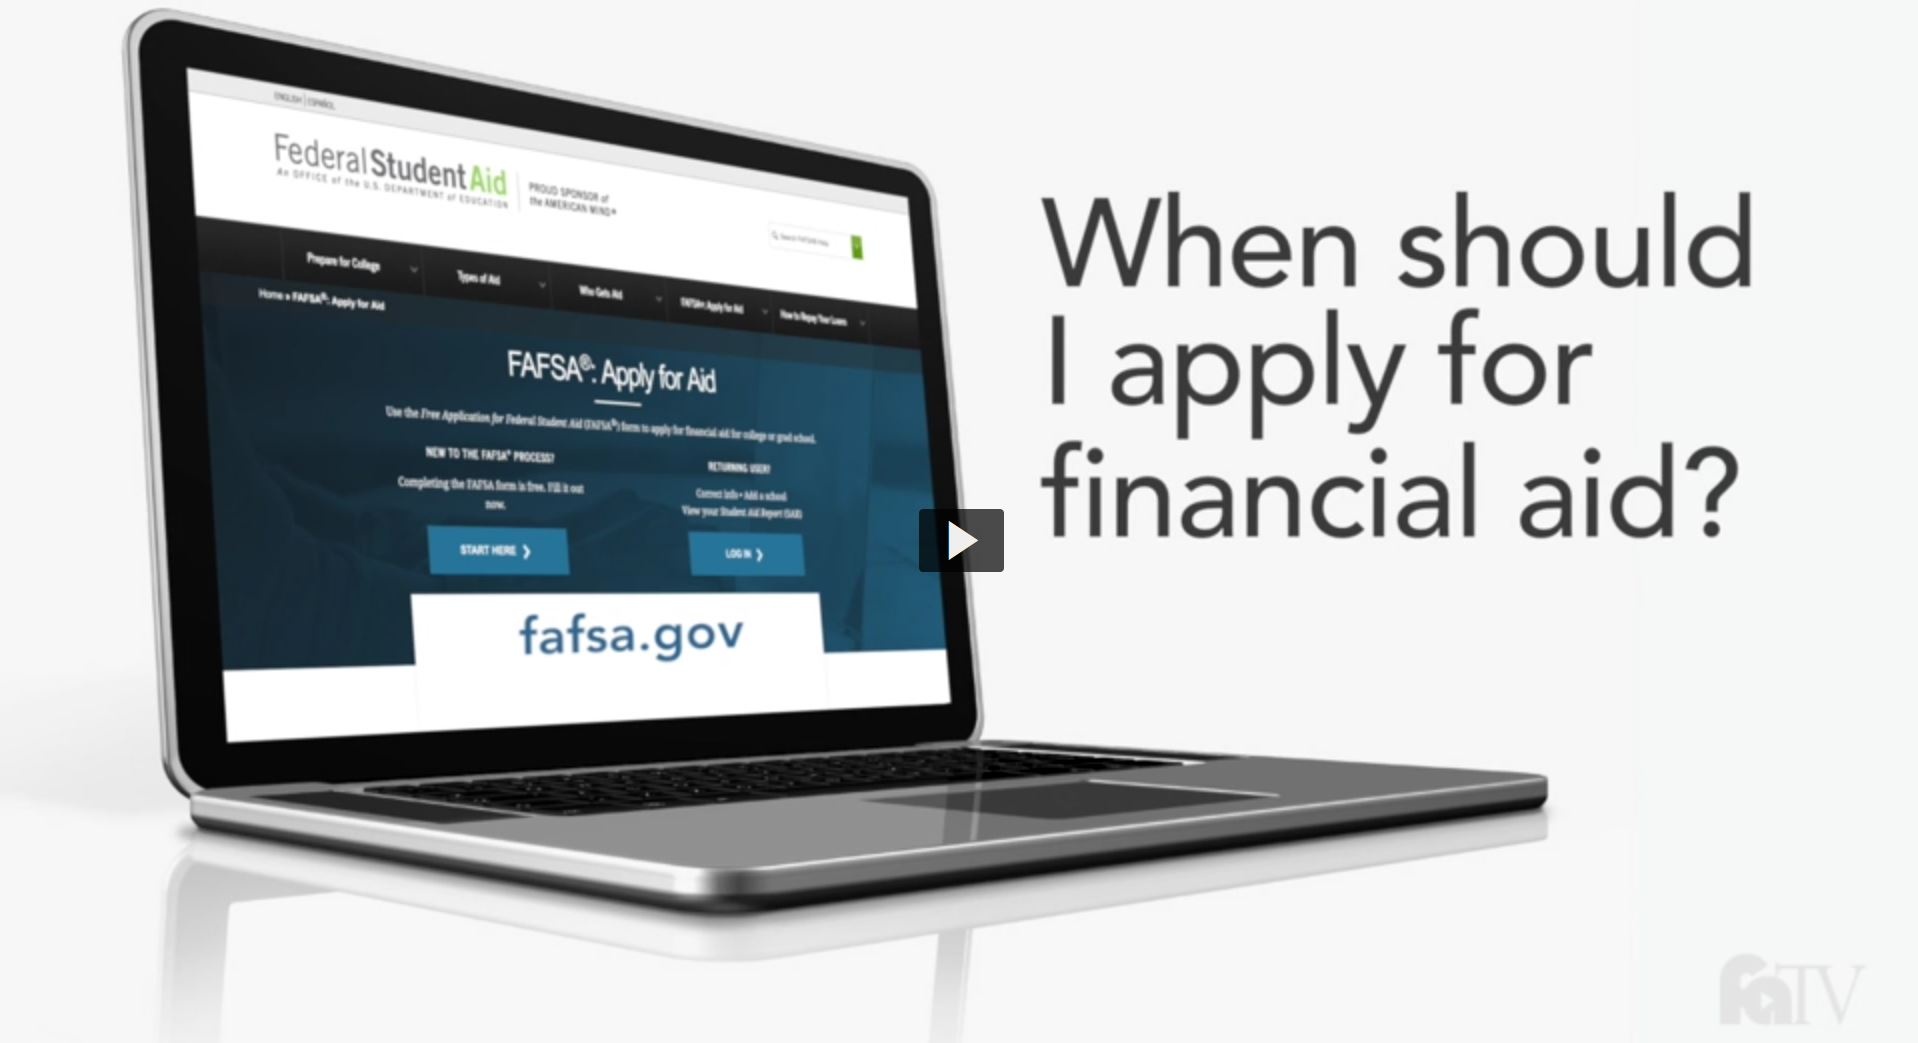 When Should I appy for Financial Aid videos